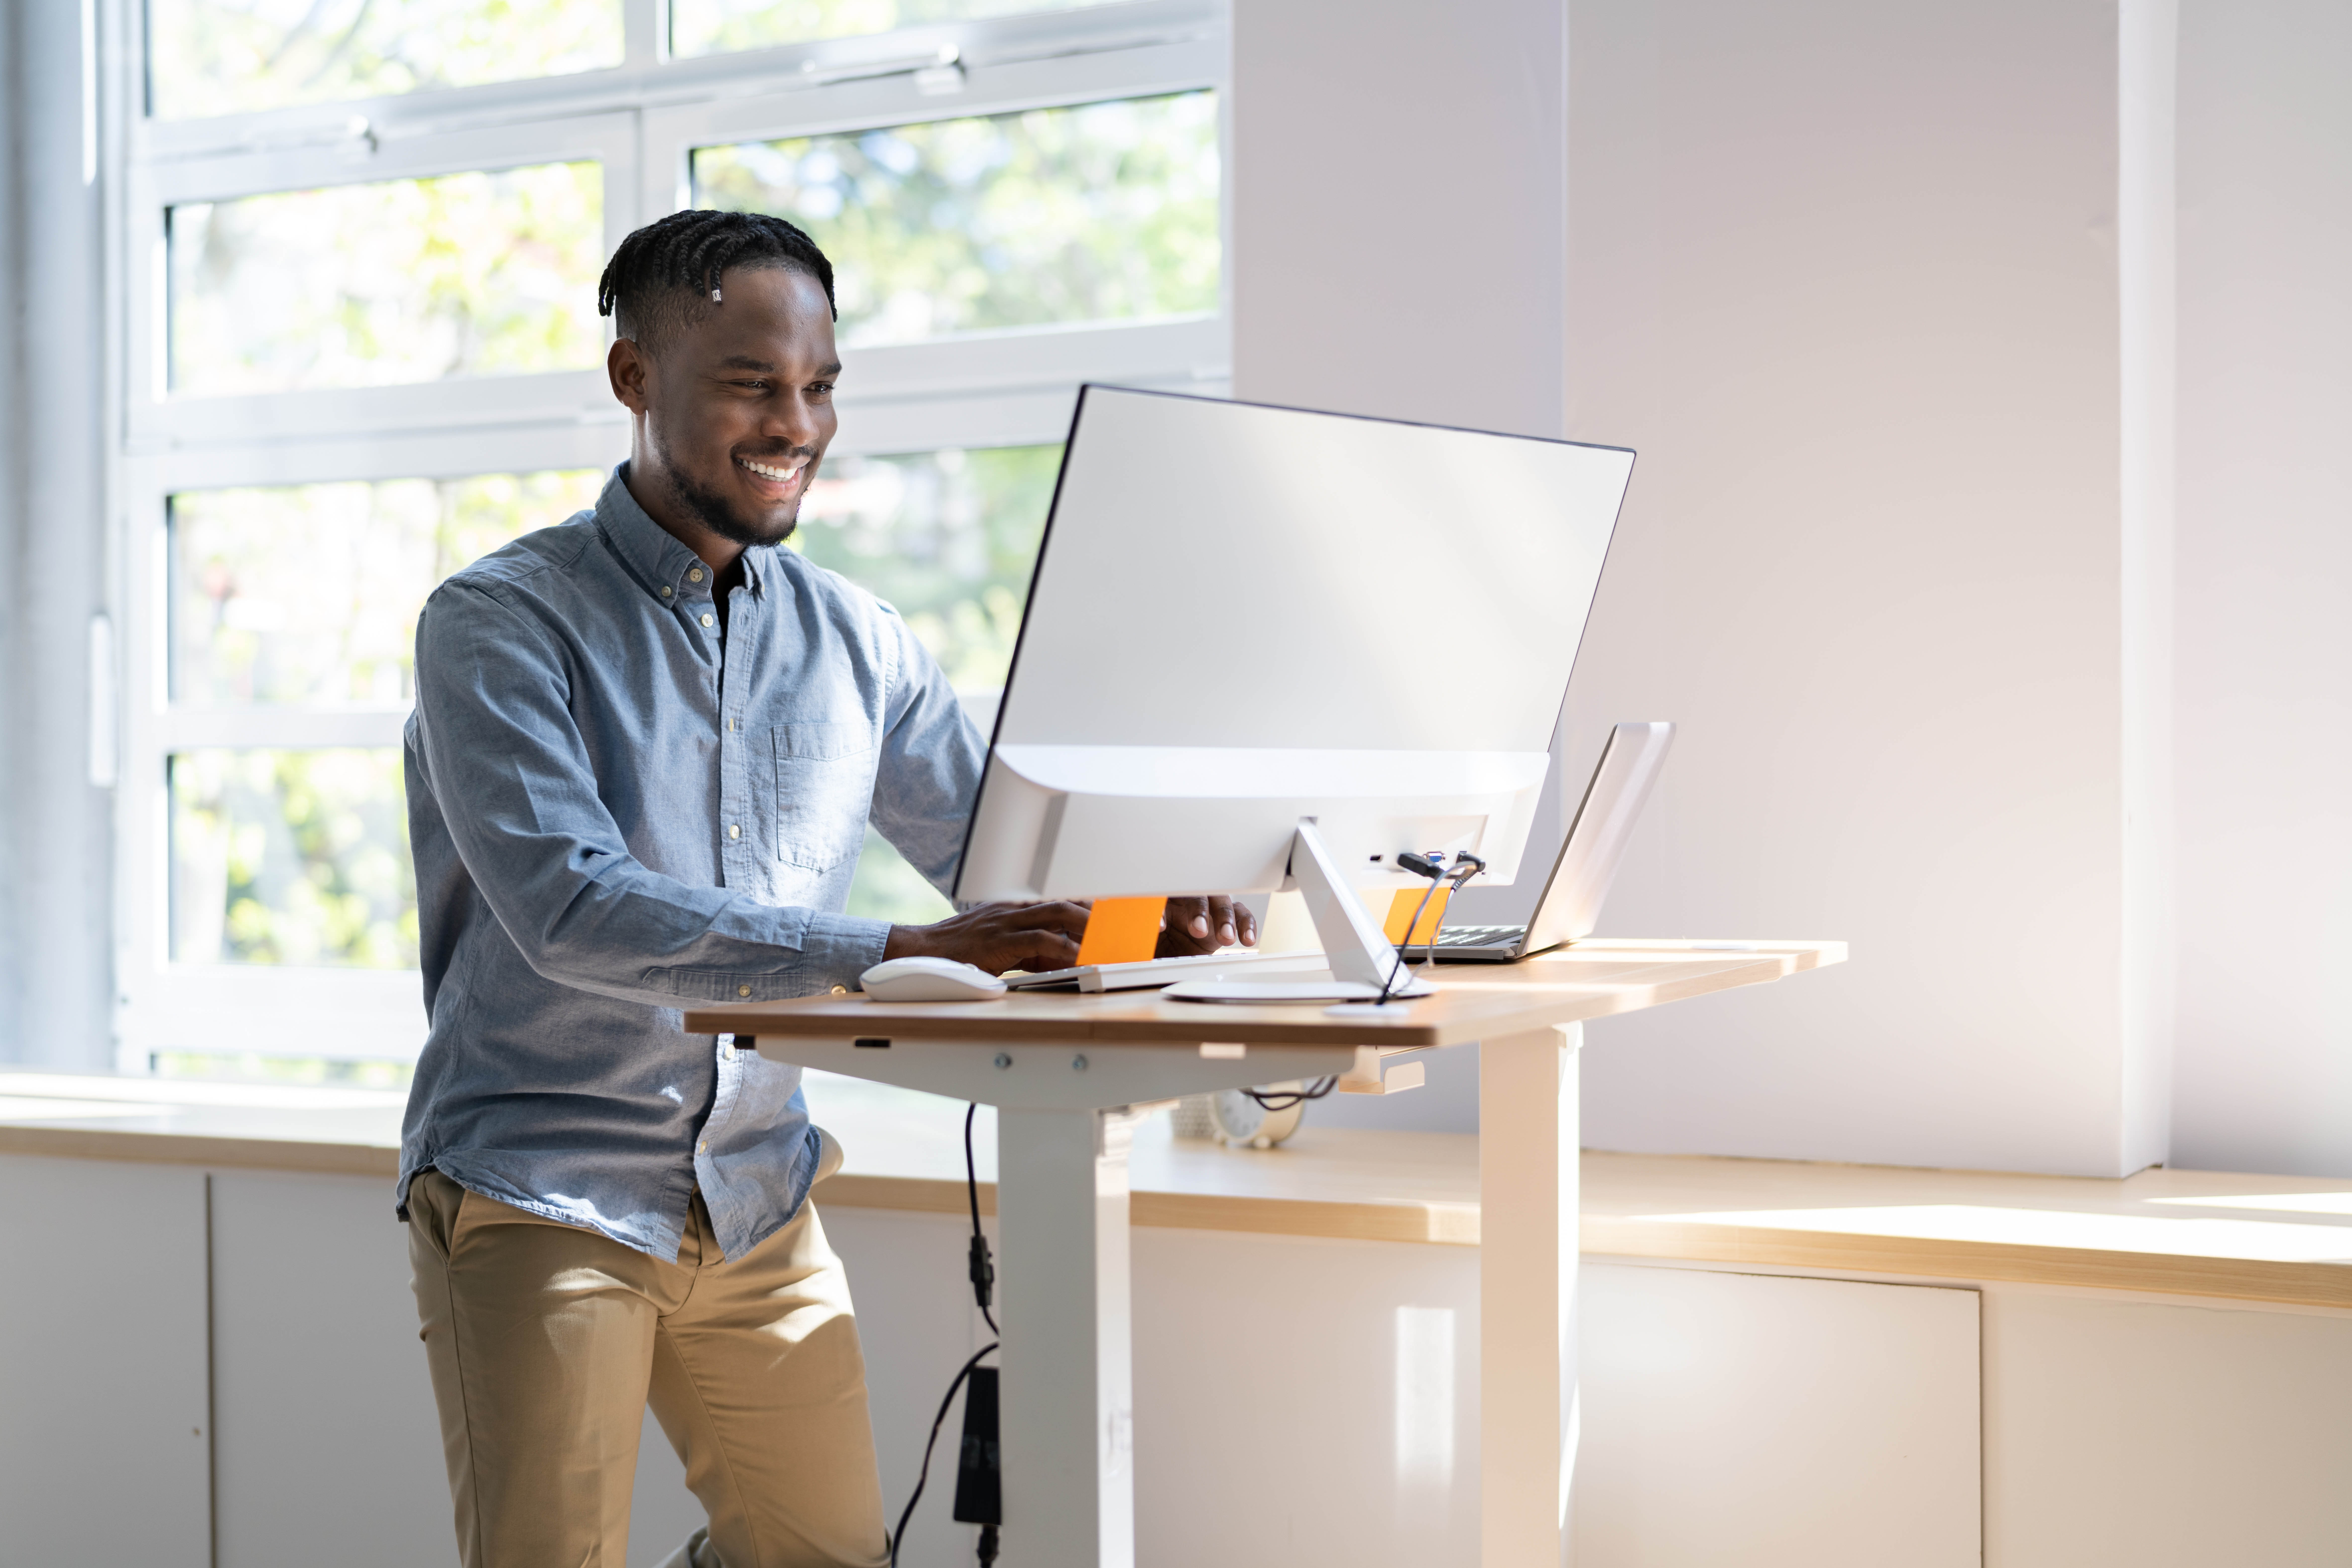 Young, professional black man stands at his standing desk completing work on the screen